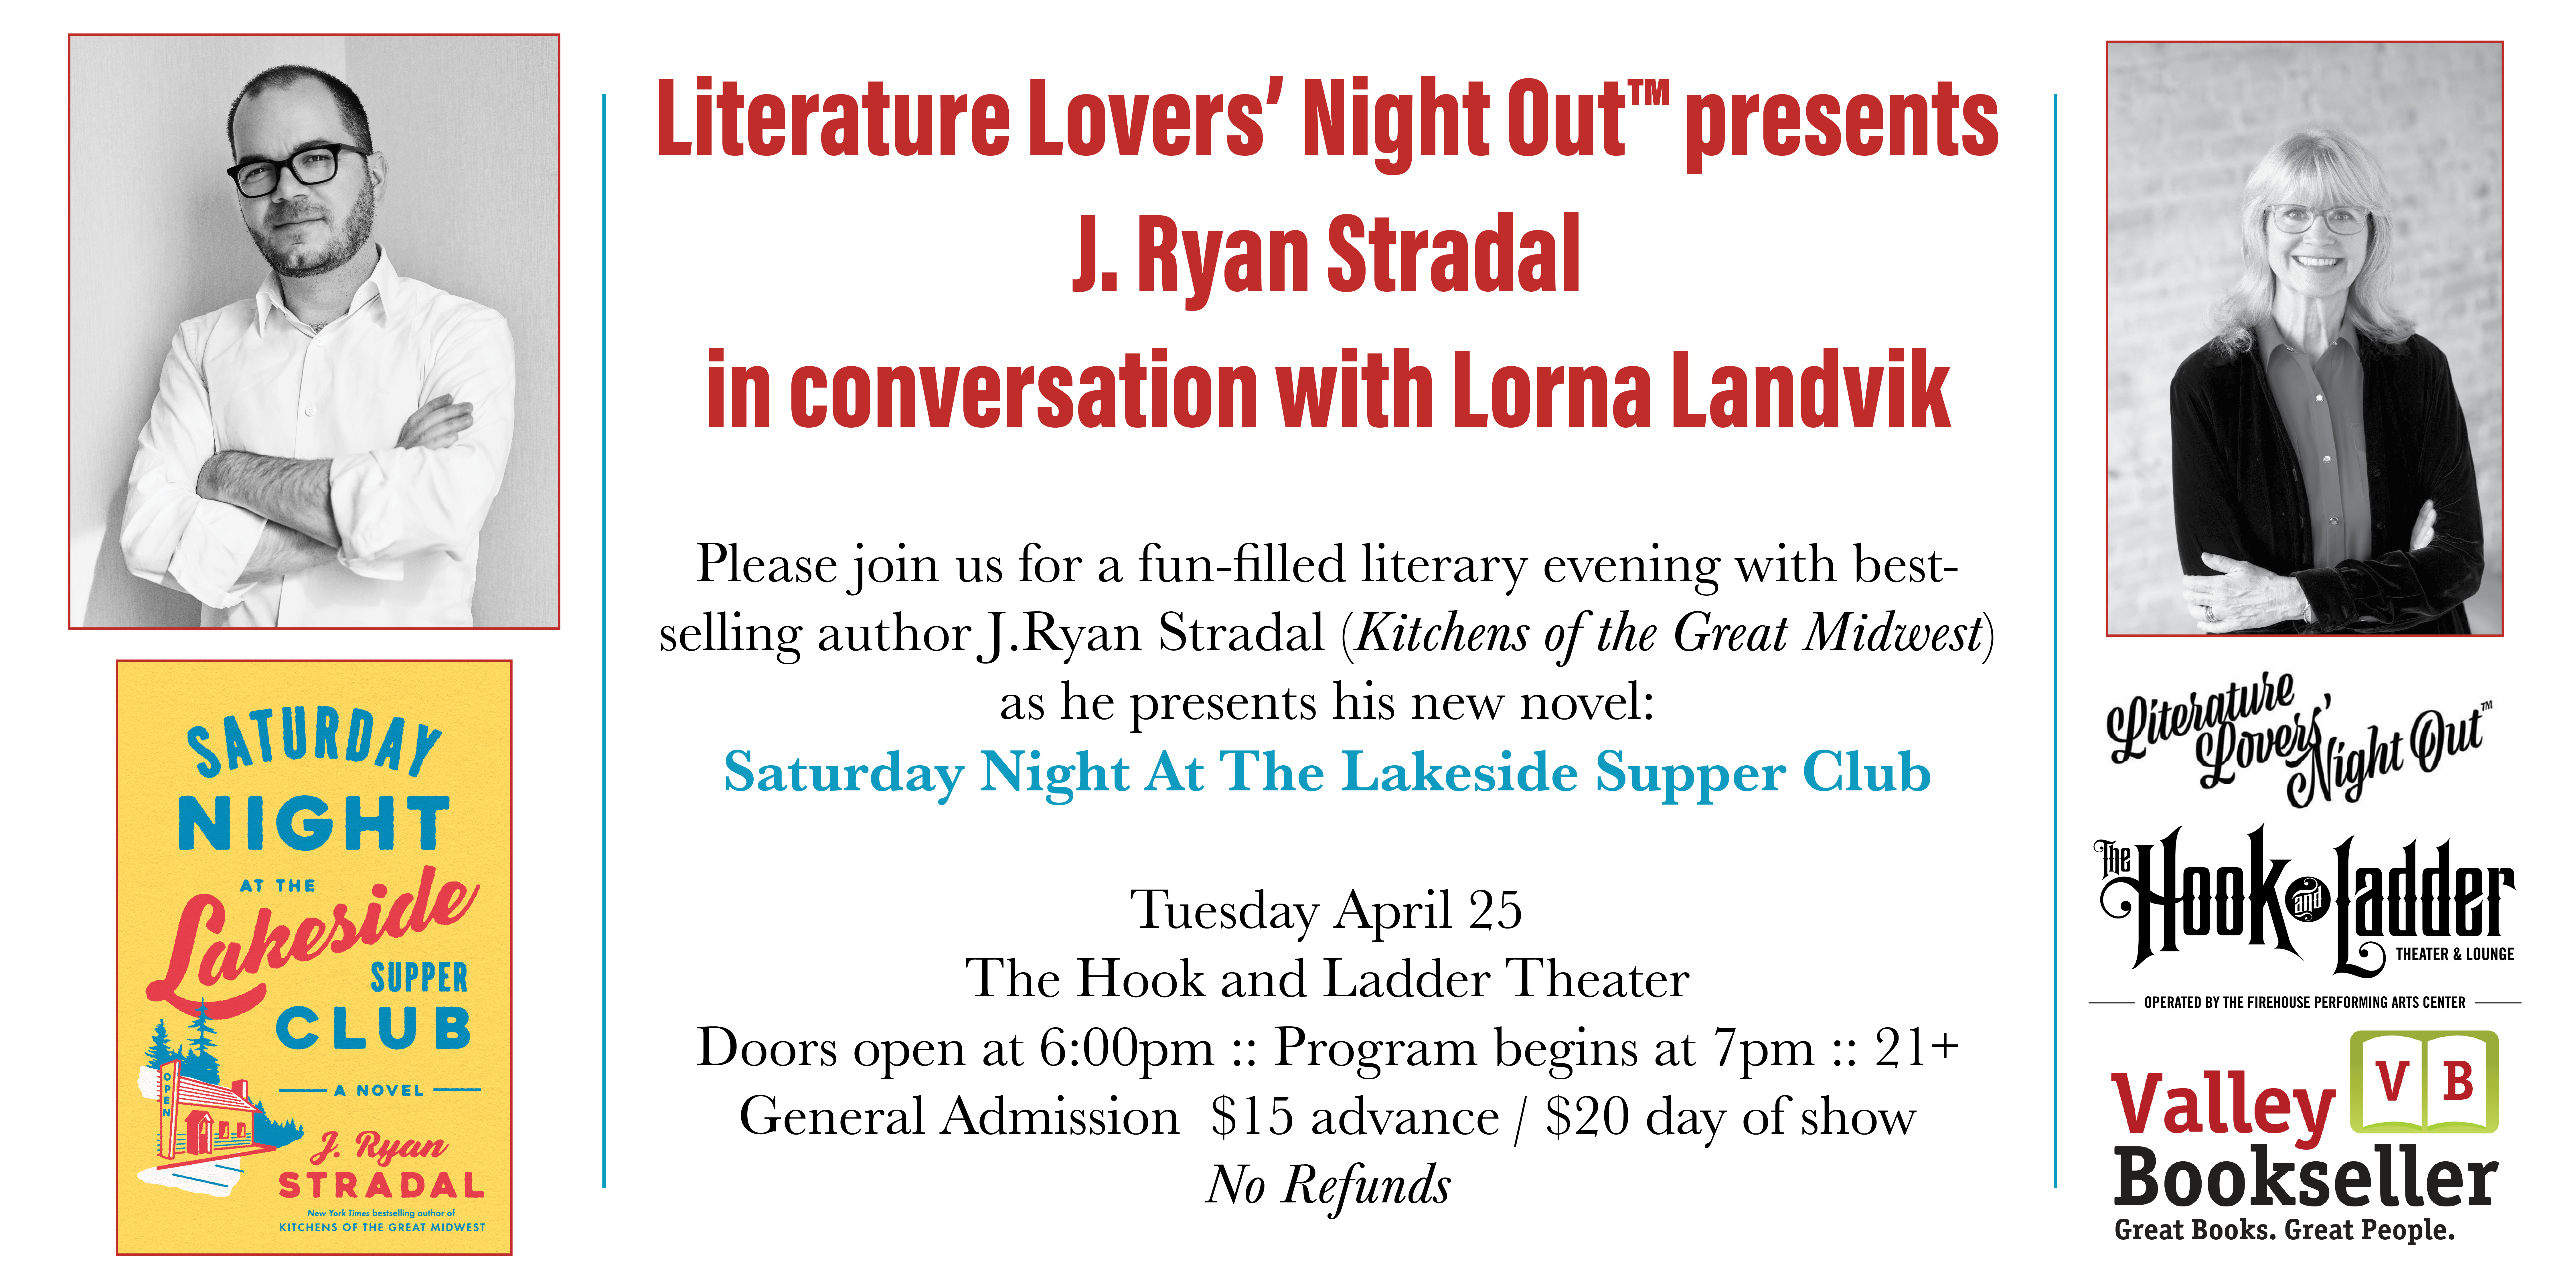 Literature Lovers' Night Out™ presents J. Ryan Stradal ​in conversation with Lorna Landvik Tuesday April 25 The Hook and Ladder Theater Doors 6:00pm :: Program 7pm :: 21+ General Admission $15 ADV / $20 DOS NO REFUNDS